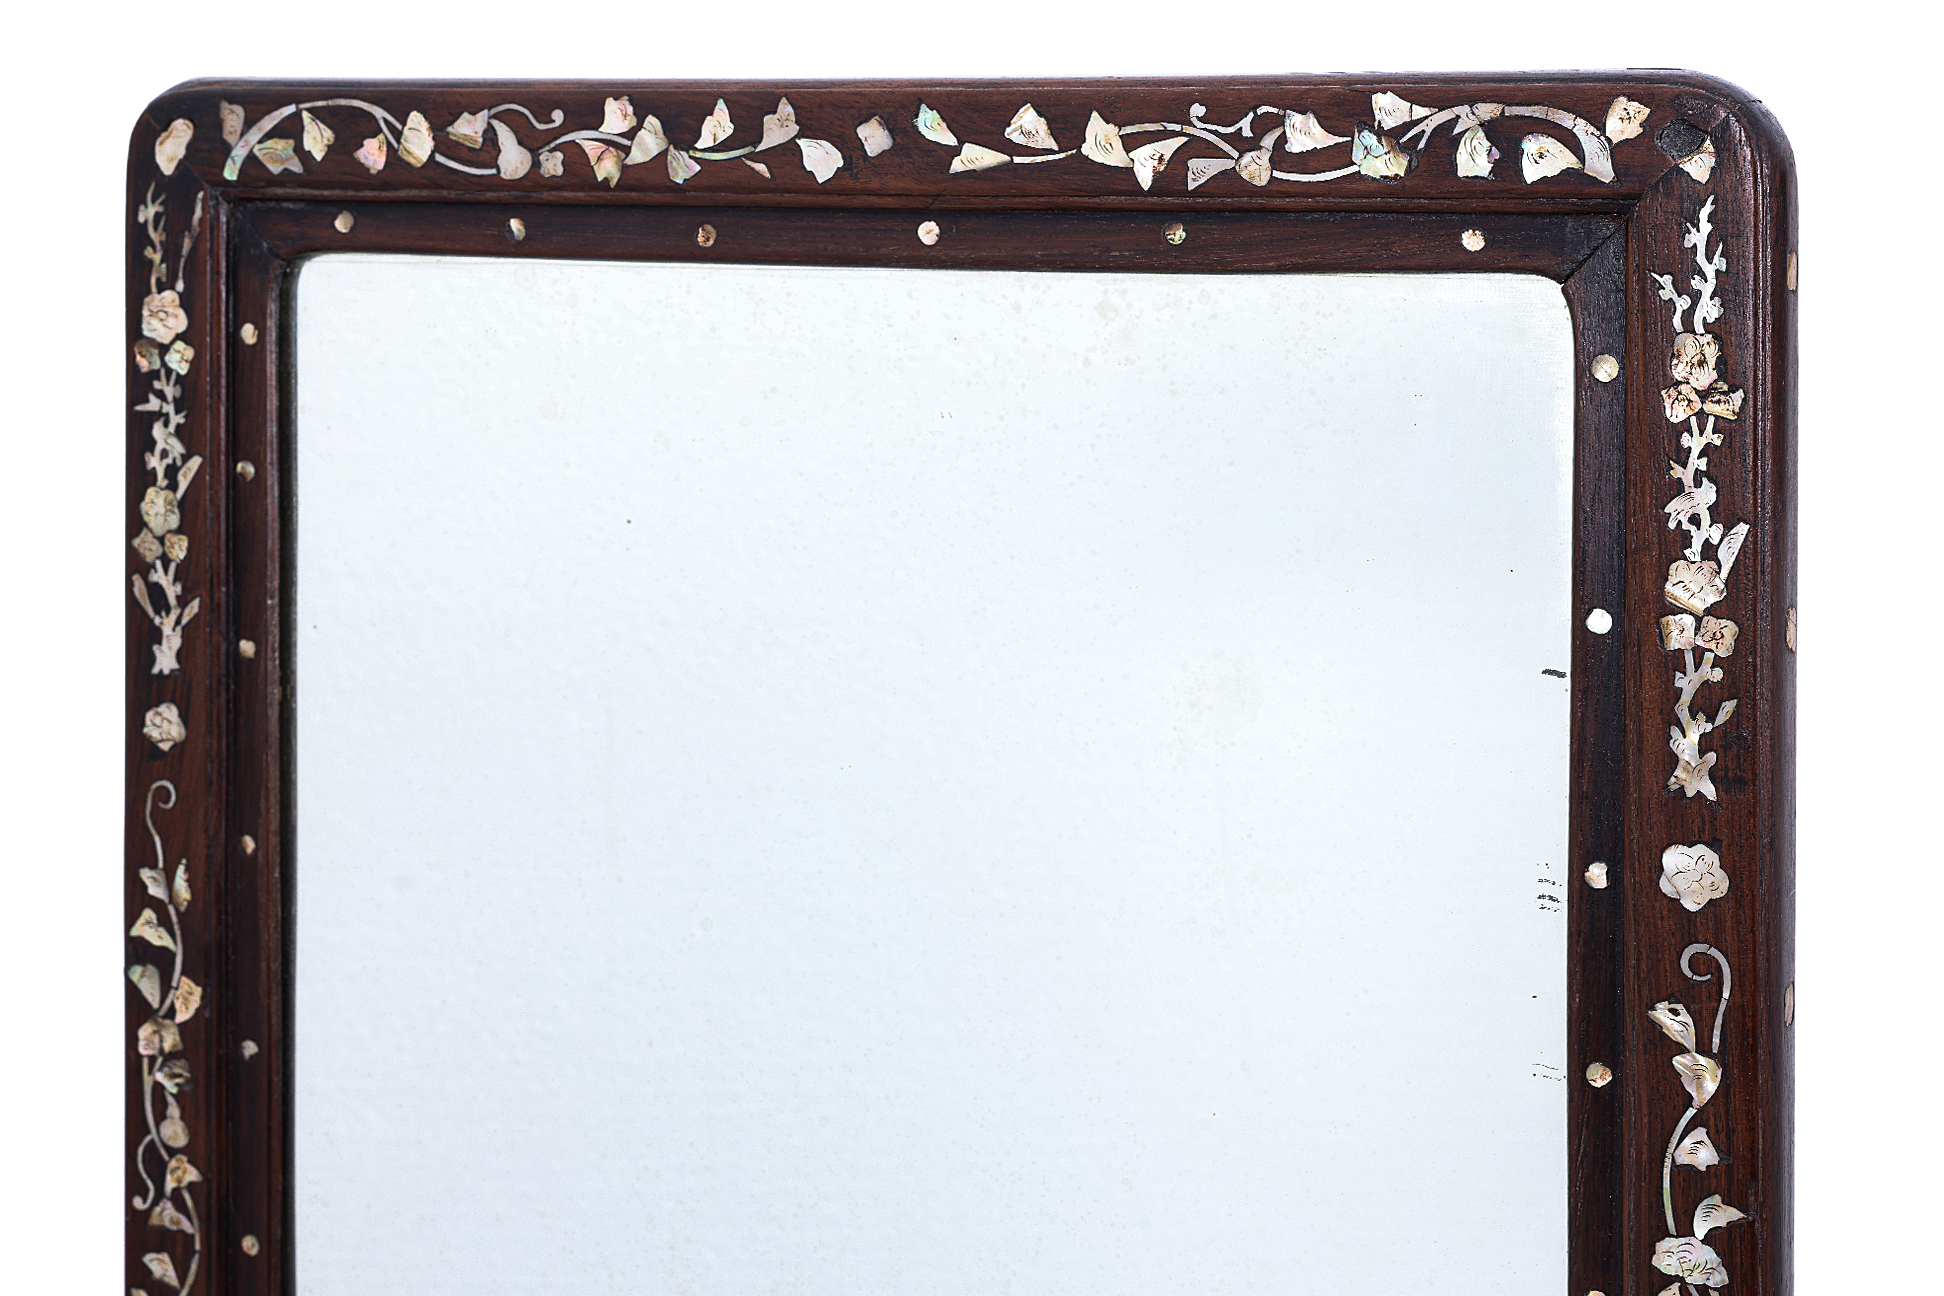 A BLACKWOOD AND MOTHER OF PEARL INLAID MIRROR ON STAND - Image 3 of 3